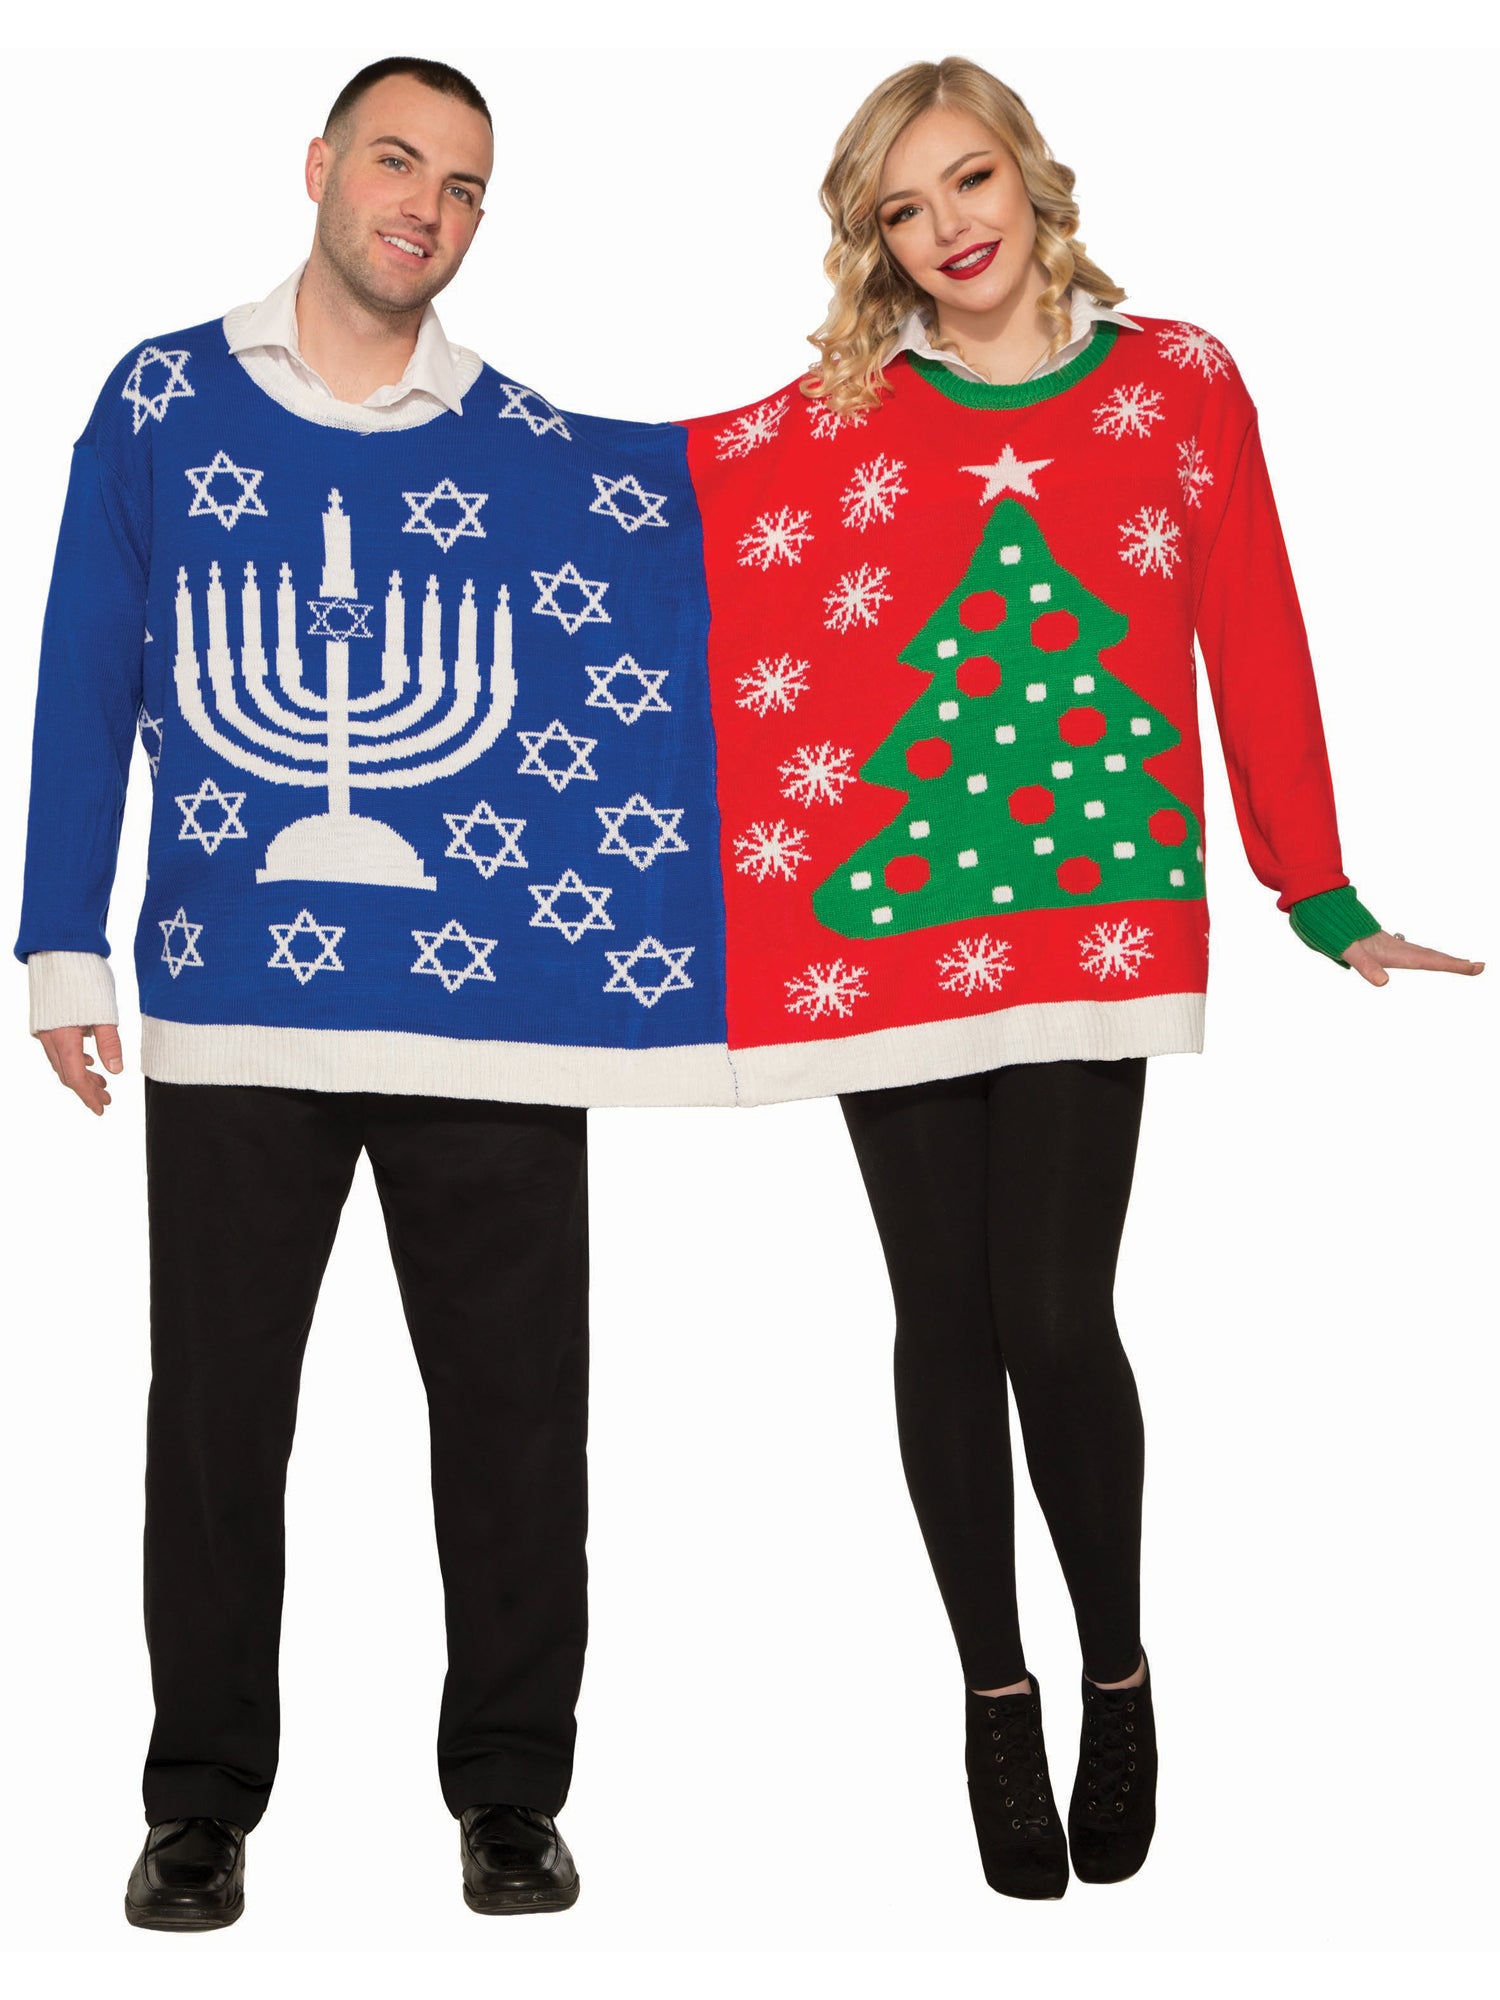 Chanukah/Christmas for Two Sweater - costumes.com